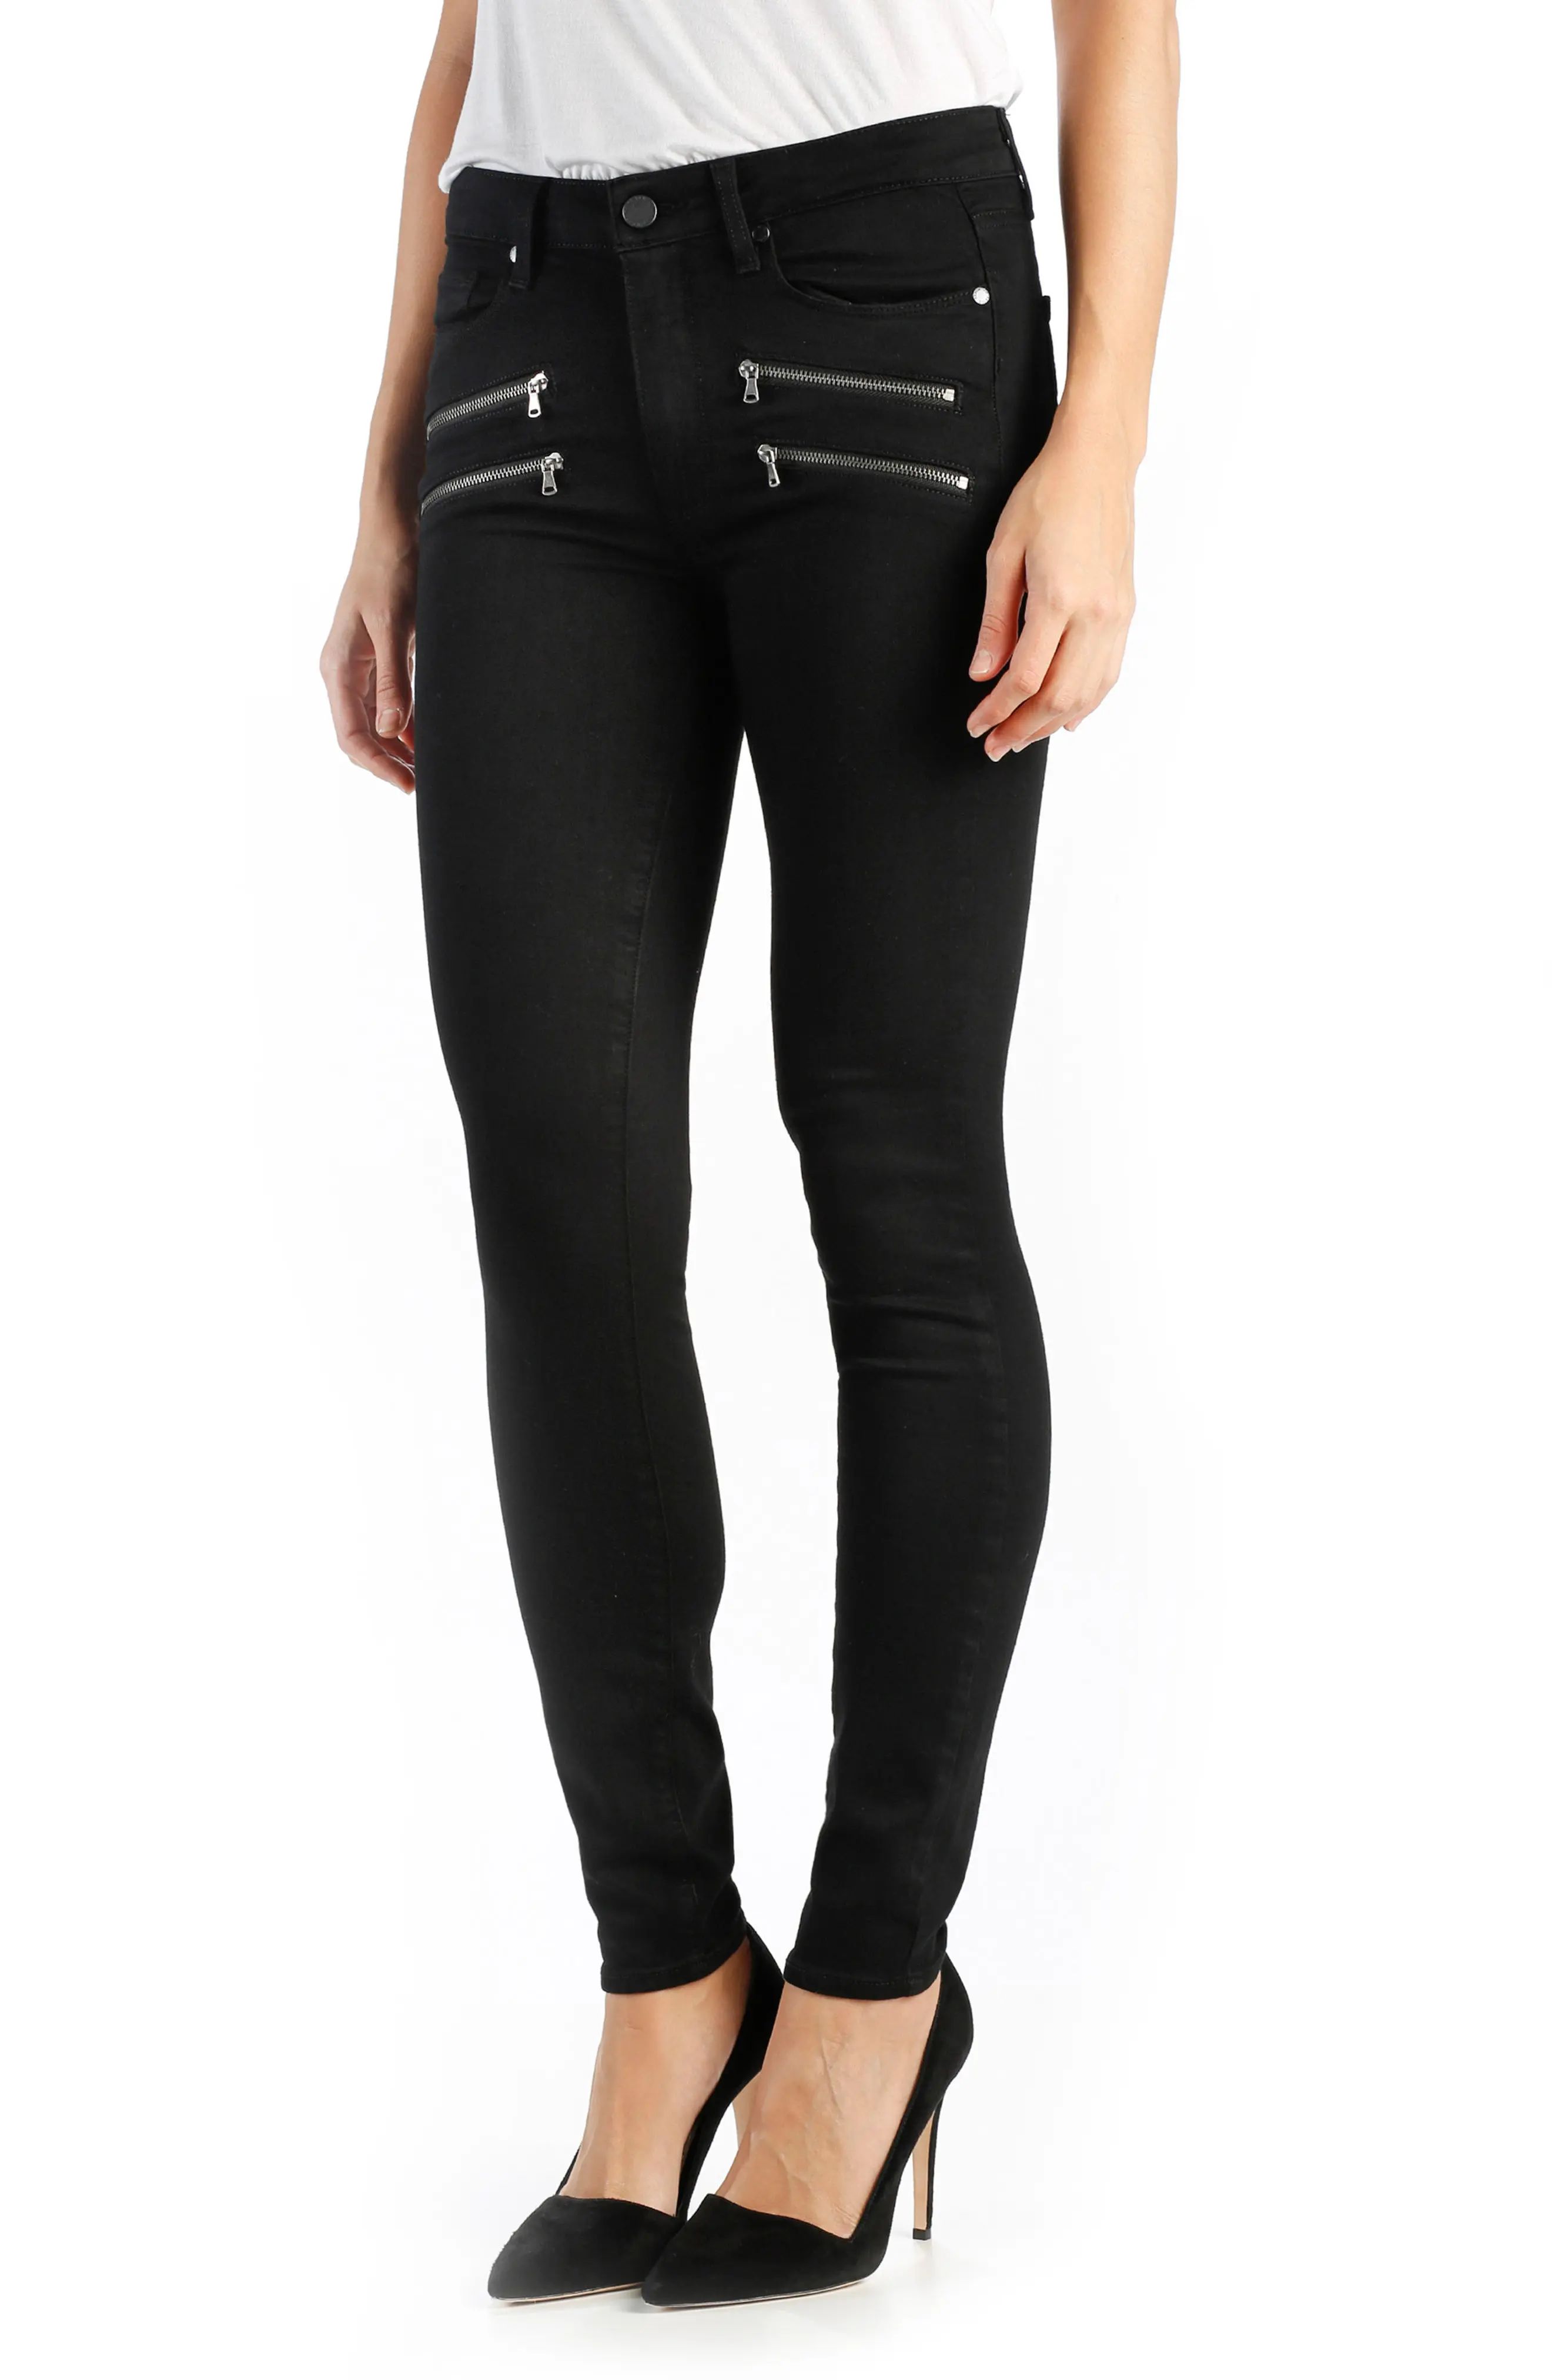 PAIGE Transcend - Edgemont High Rise Ultra Skinny Jeans, Size 26 in Black Shadow at Nordstrom | Nordstrom